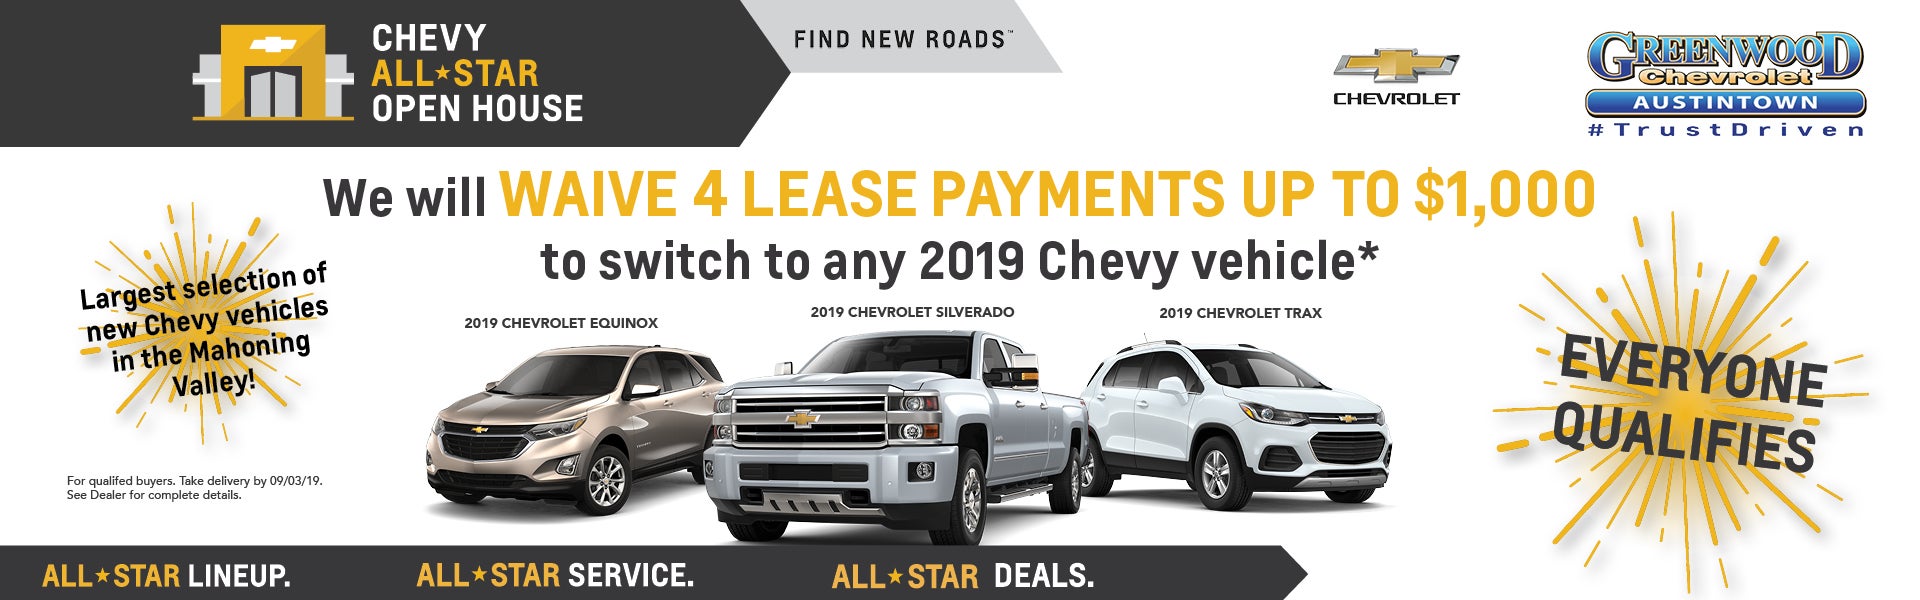 New & Used Chevrolet Dealership In Youngstown,OH | Greenwood Chevrolet